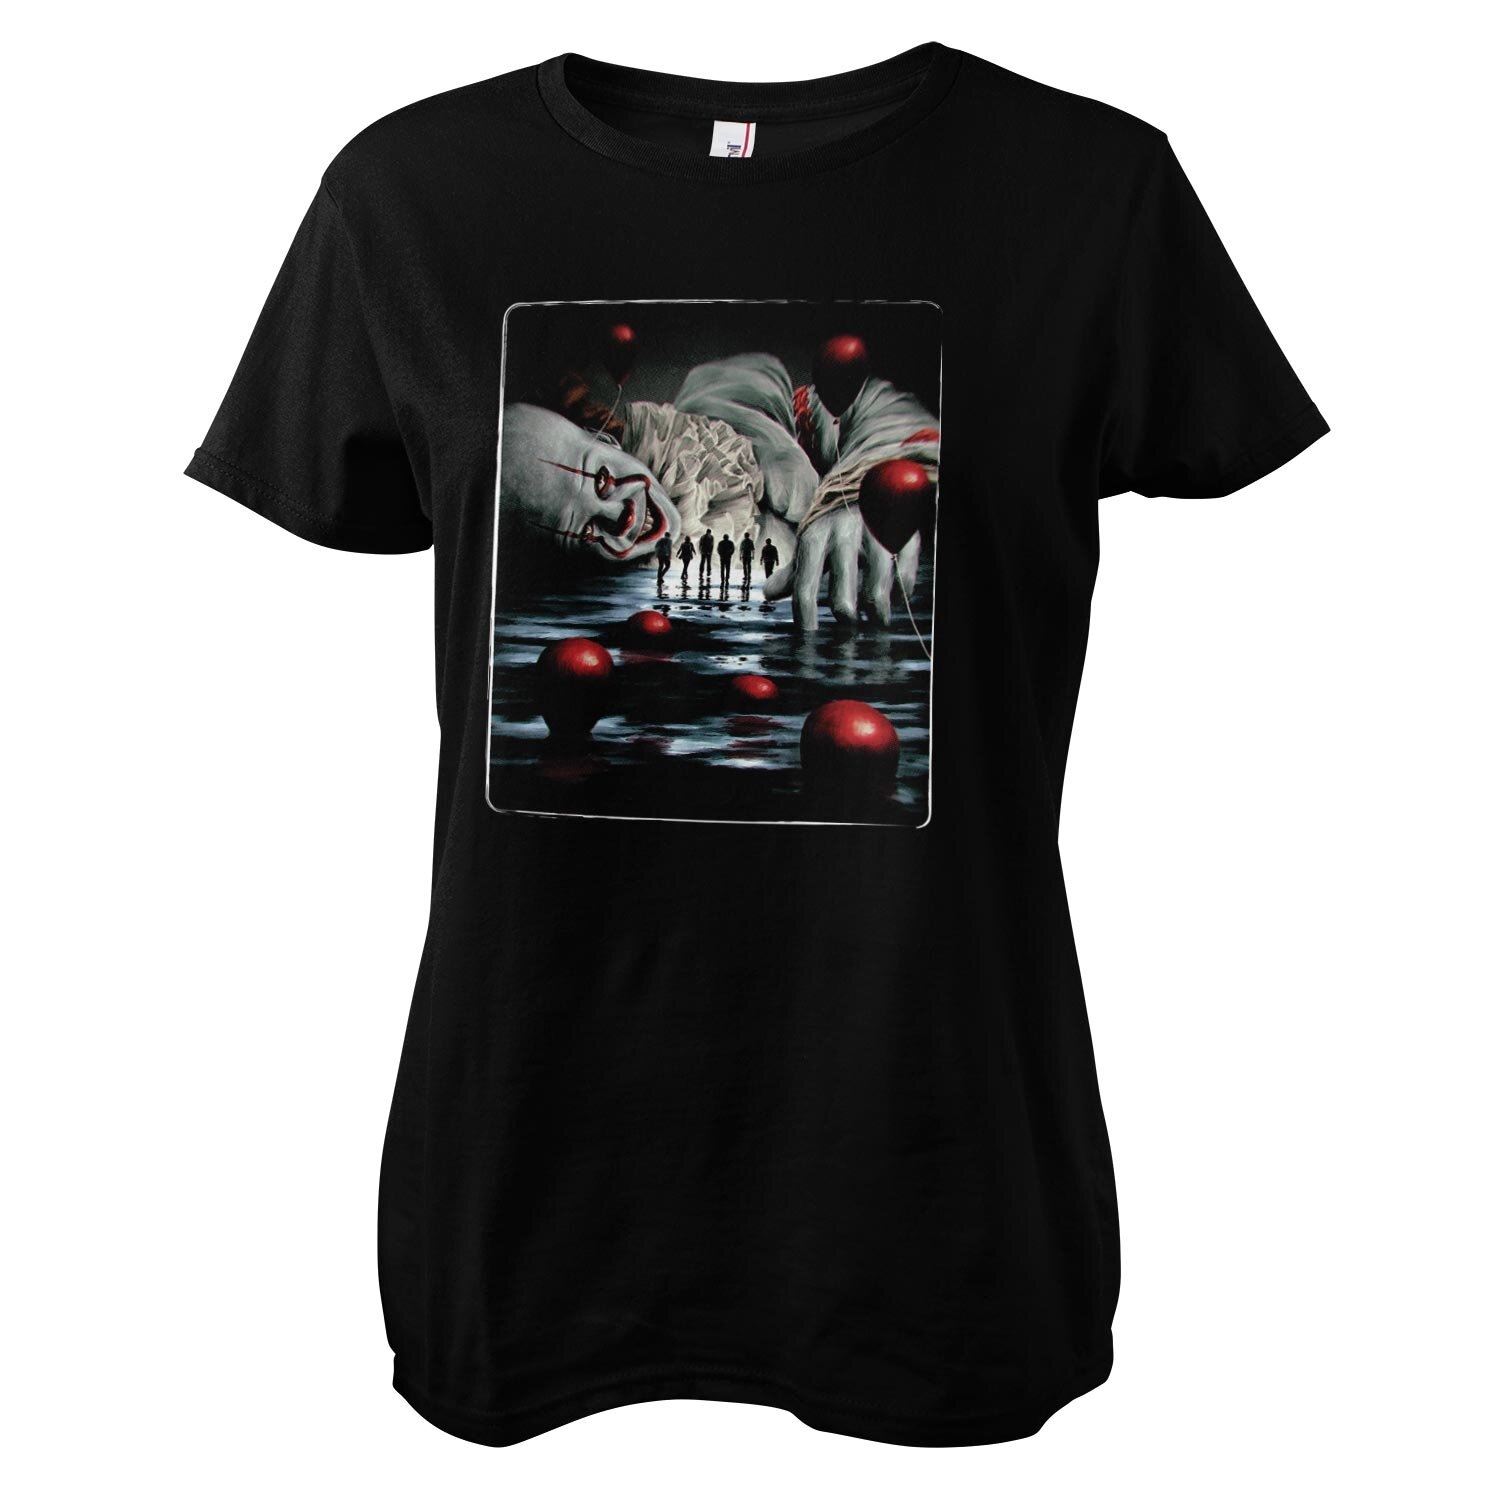 IT - Pennywise Floating Girly Tee